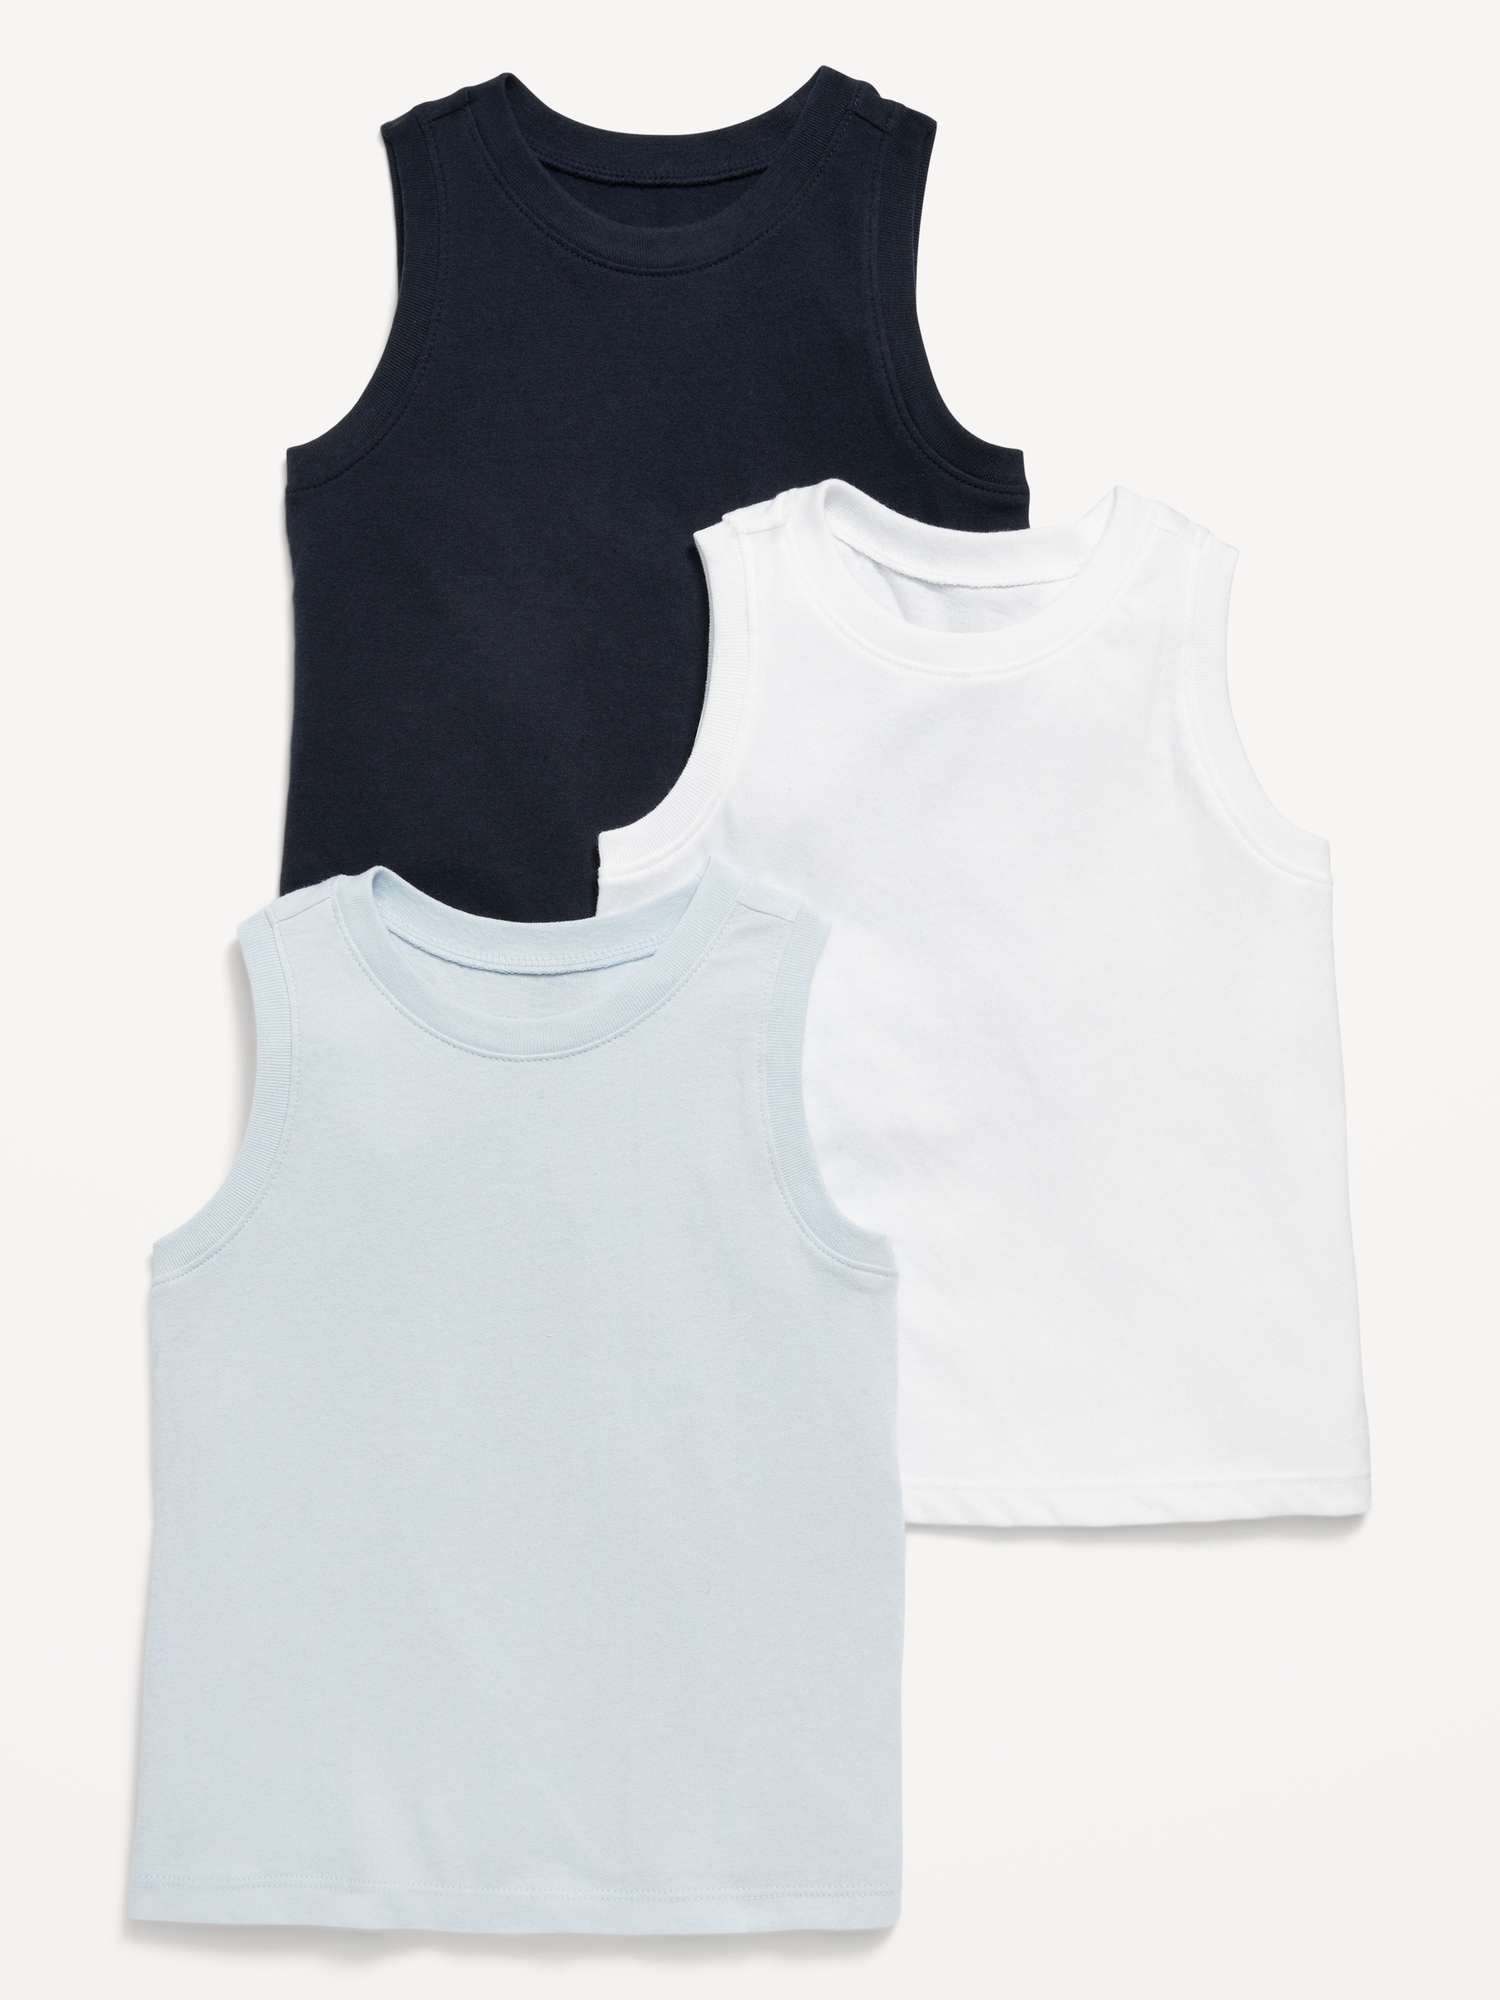 Tank Top 3-Pack for Toddler Boys